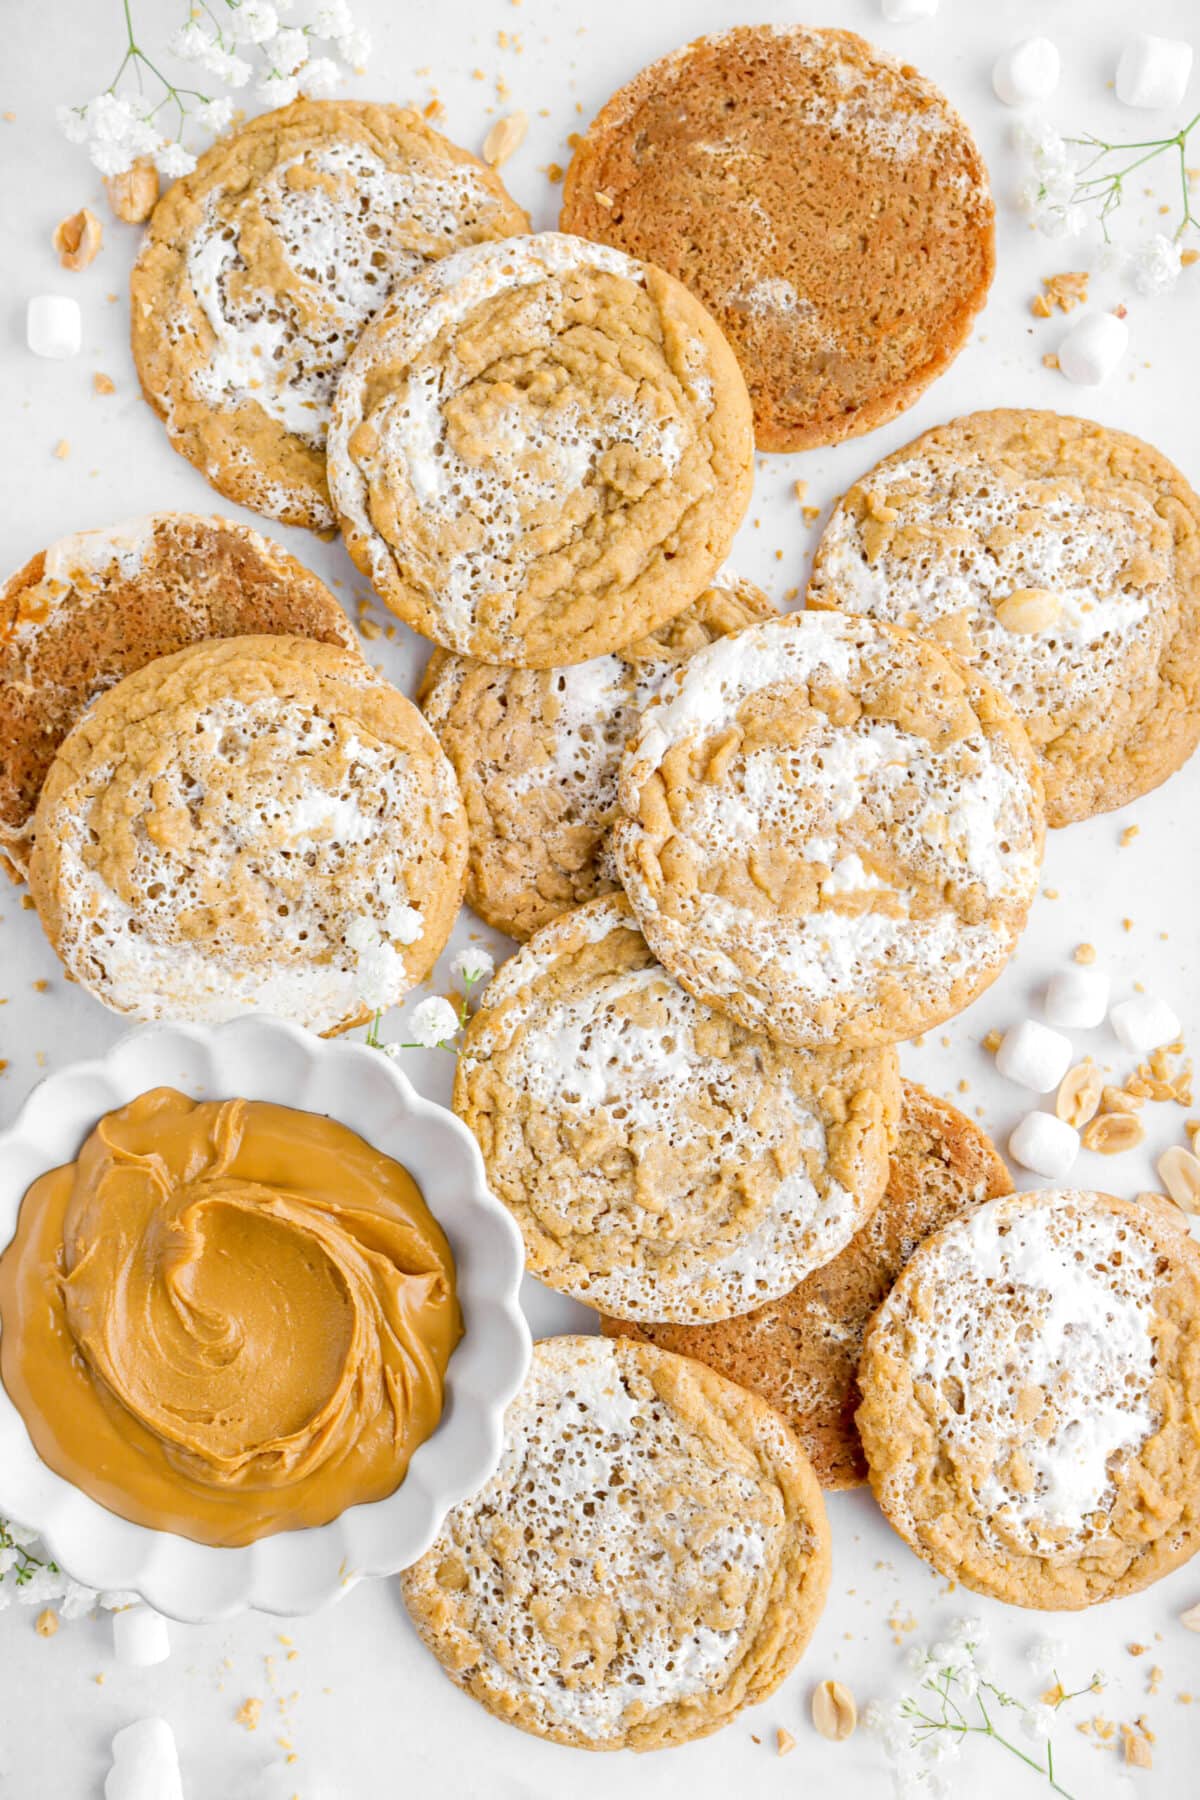 peanut butter marshmallow cookies piled on parchment paper with bowl of peanut butter beside and mini marshmallows, peanuts, and white flowers around.